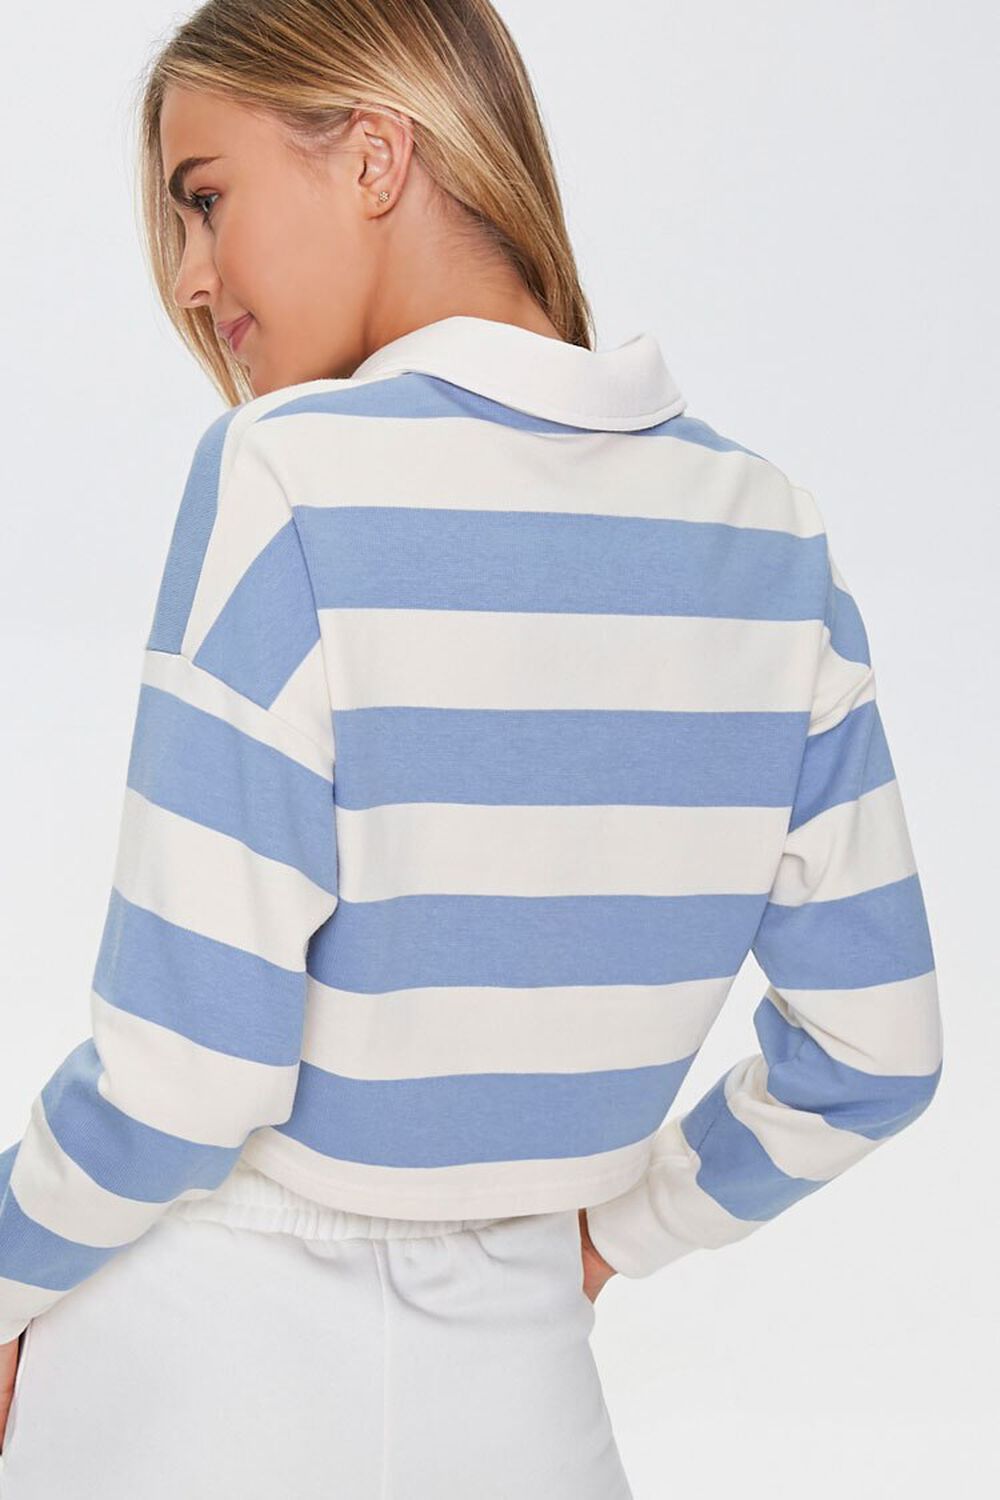 BLUE/CREAM Striped Rugby Shirt, image 3